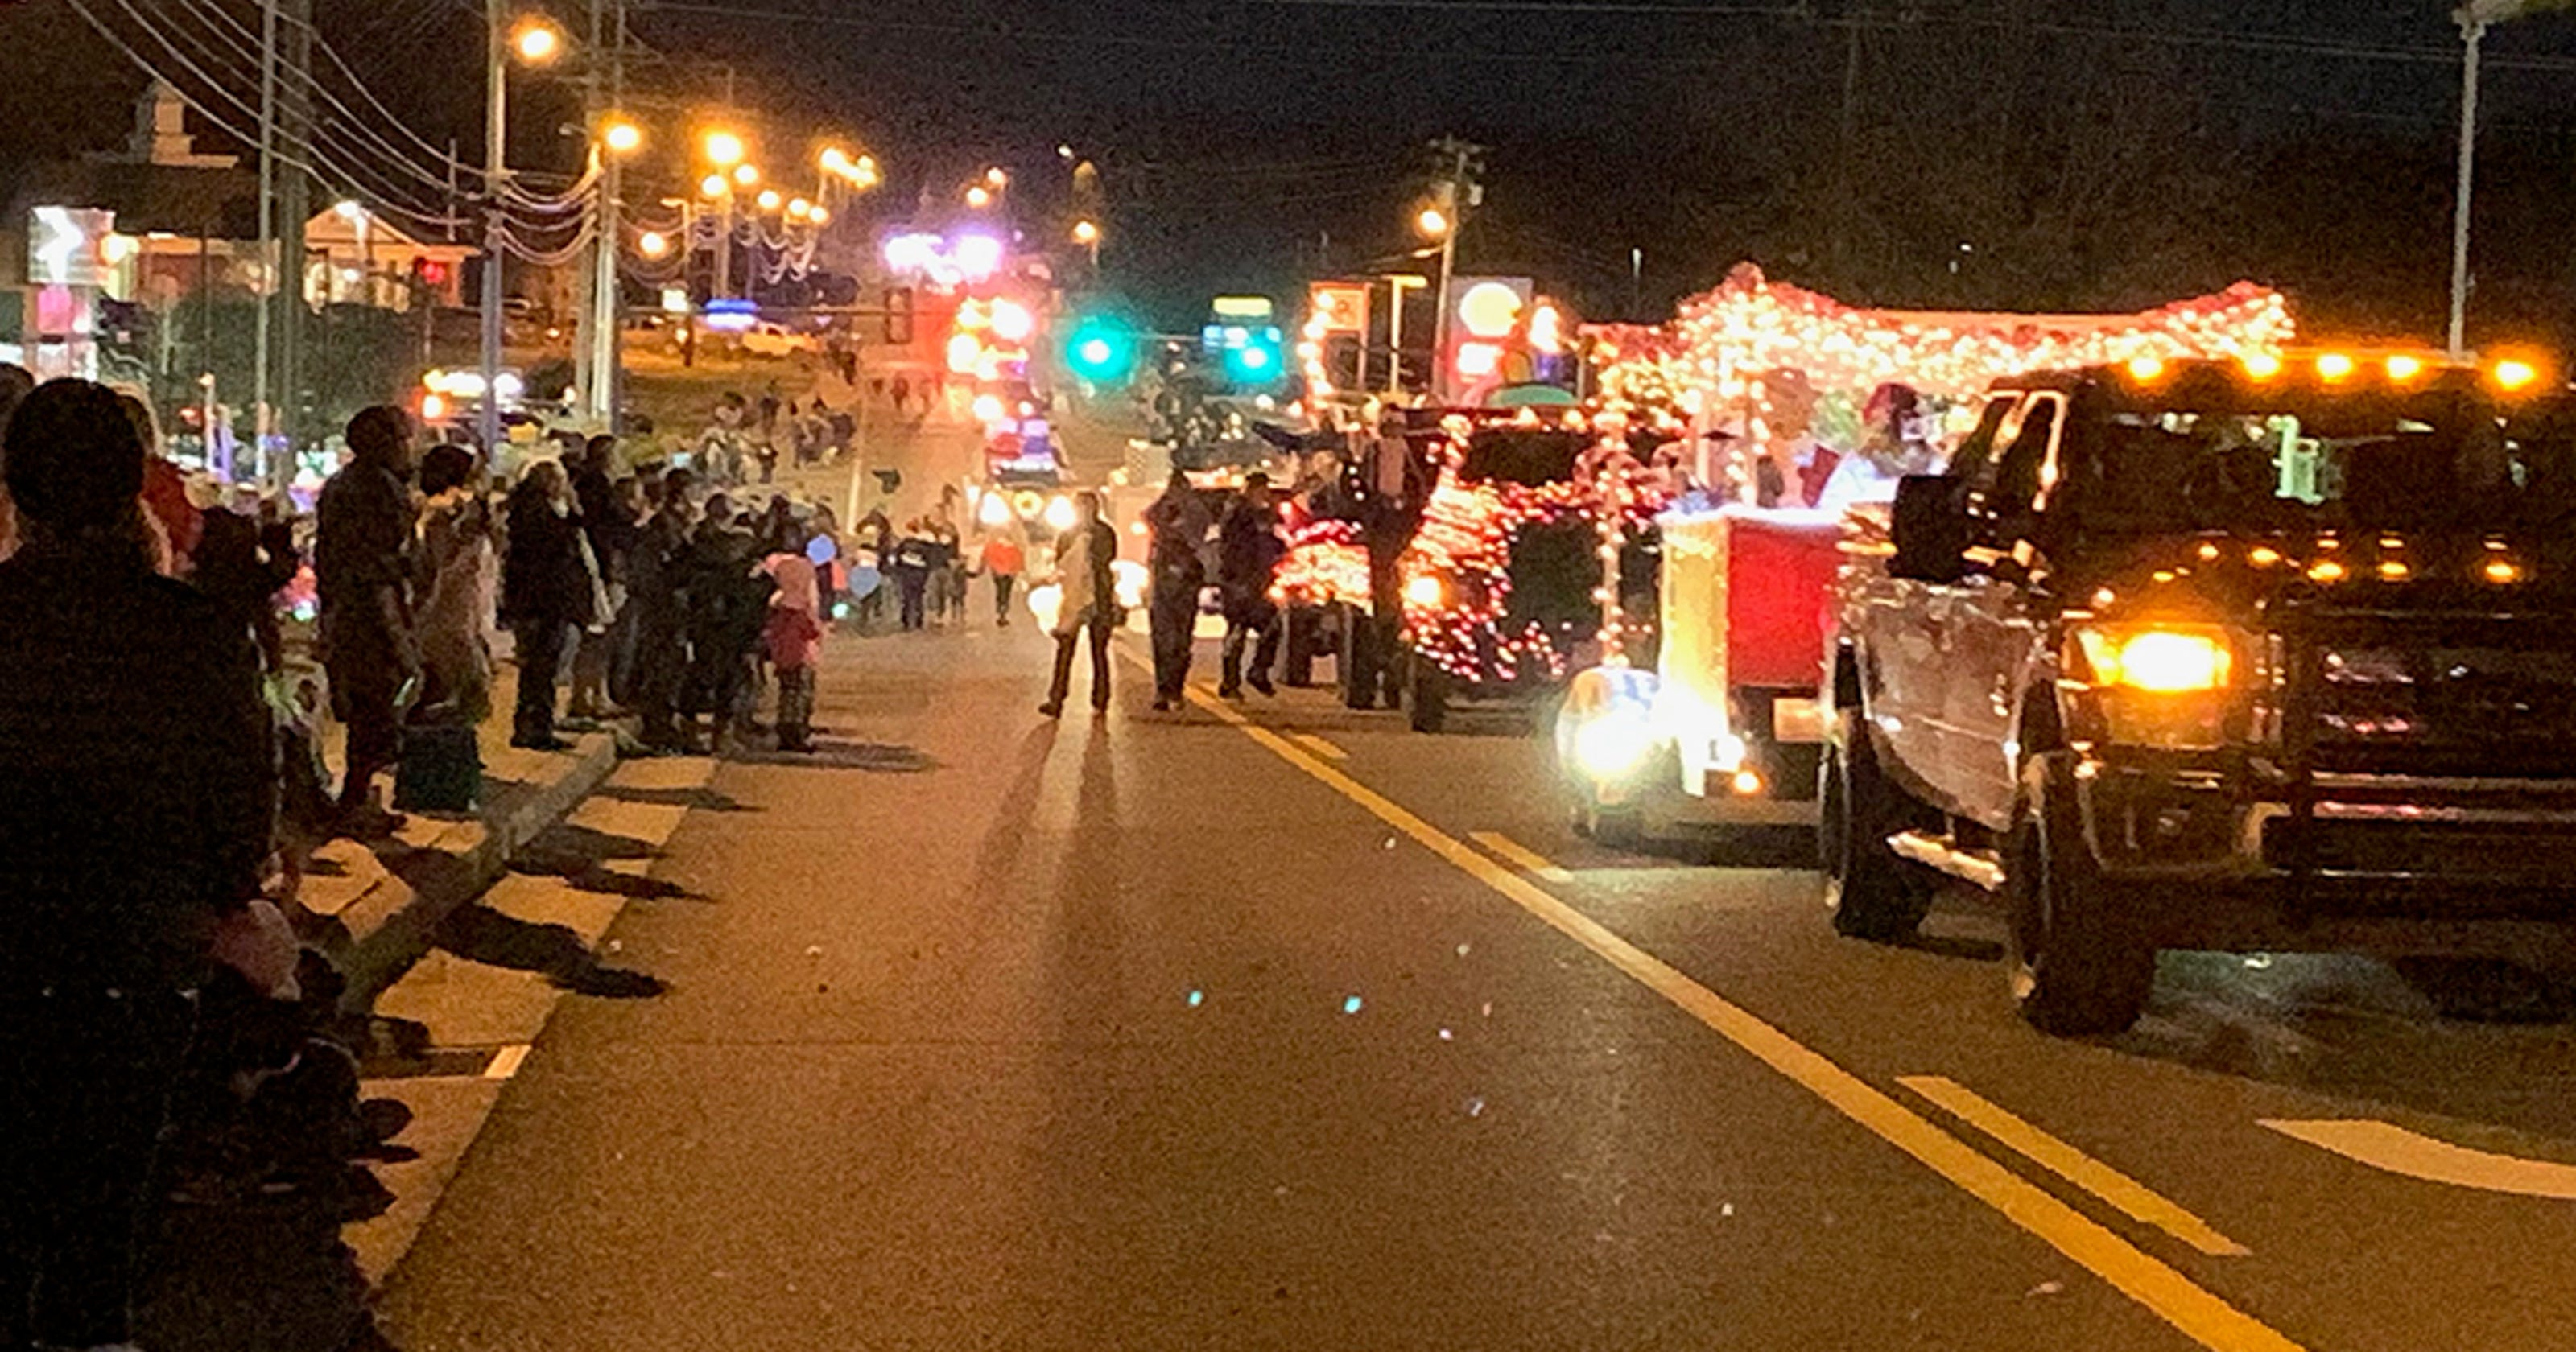 Fairview Christmas Parade offers 'Festival of Lights'